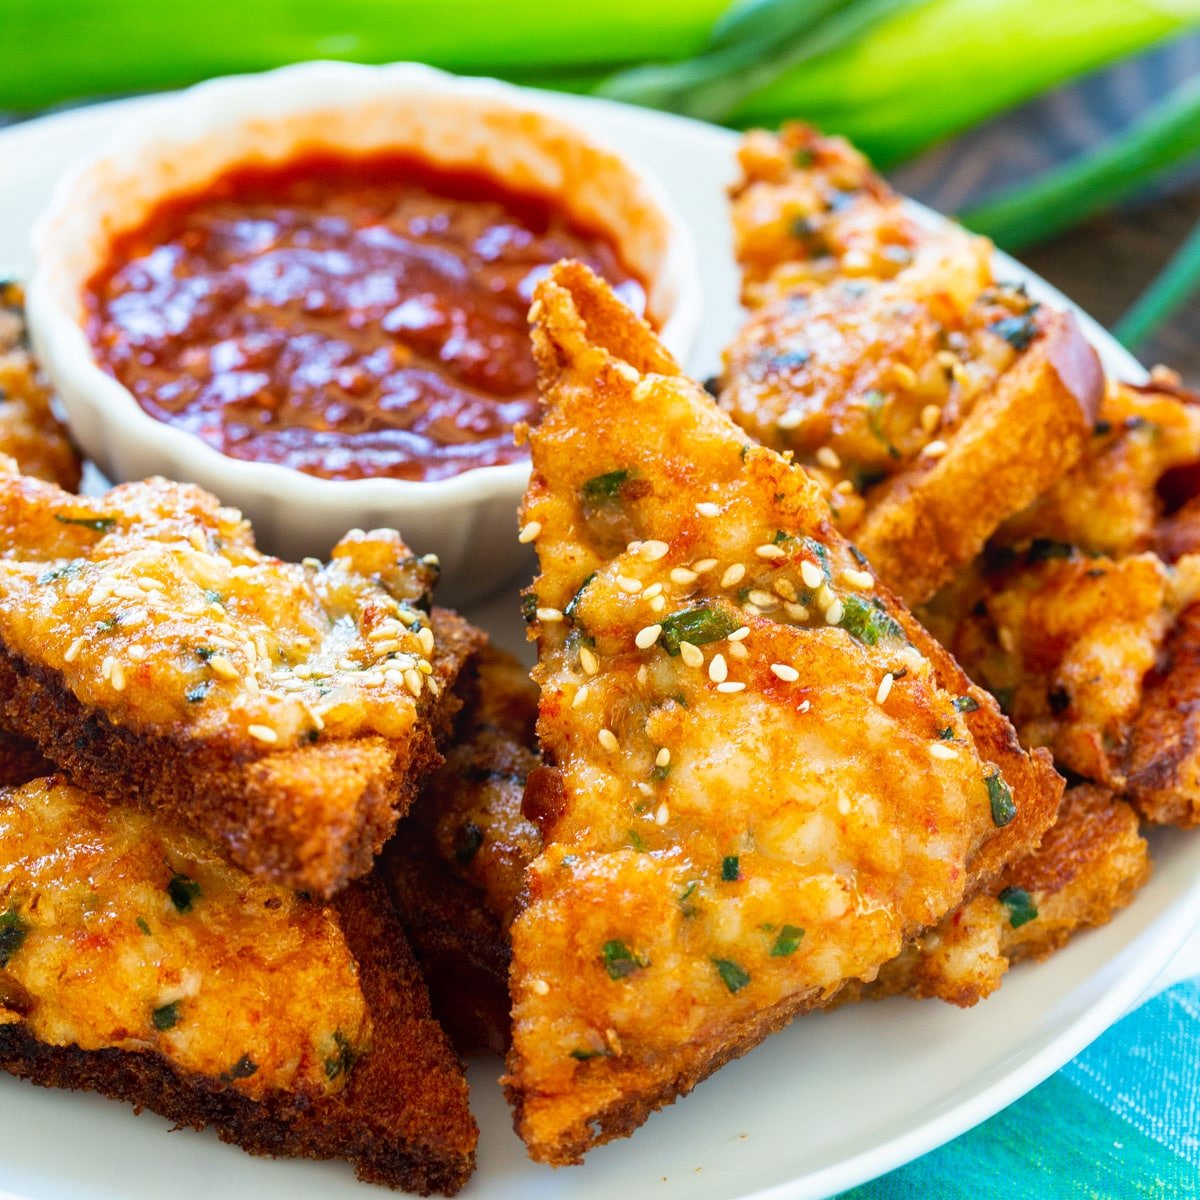 Shrimp Toast on a plate with Chili Garlic Sauce.